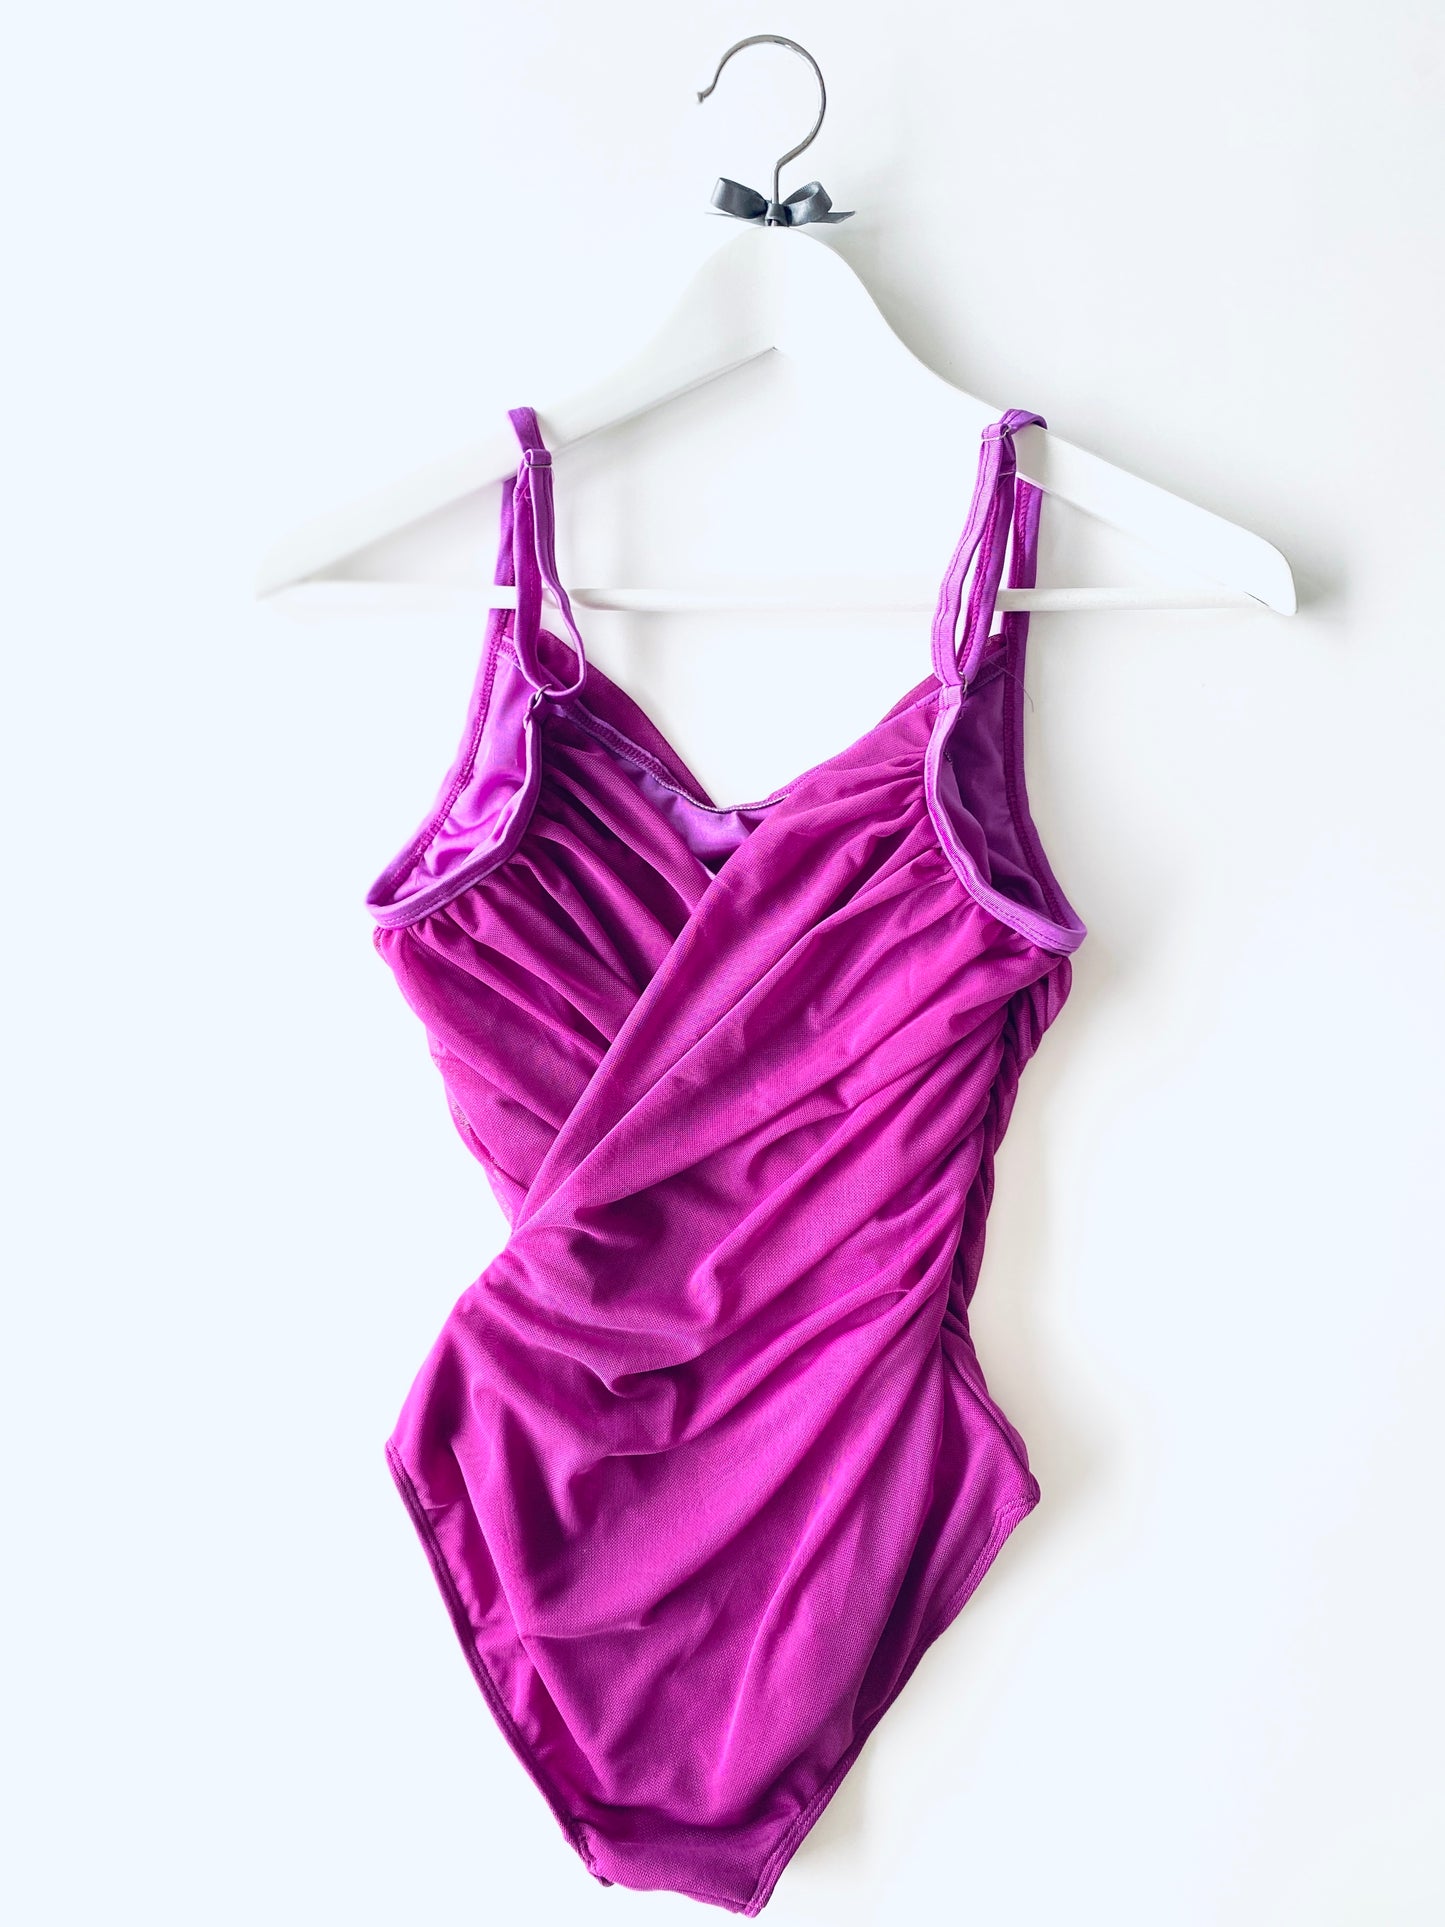 Ruched camisole ballet leotard with draped mesh in magenta from The Collective